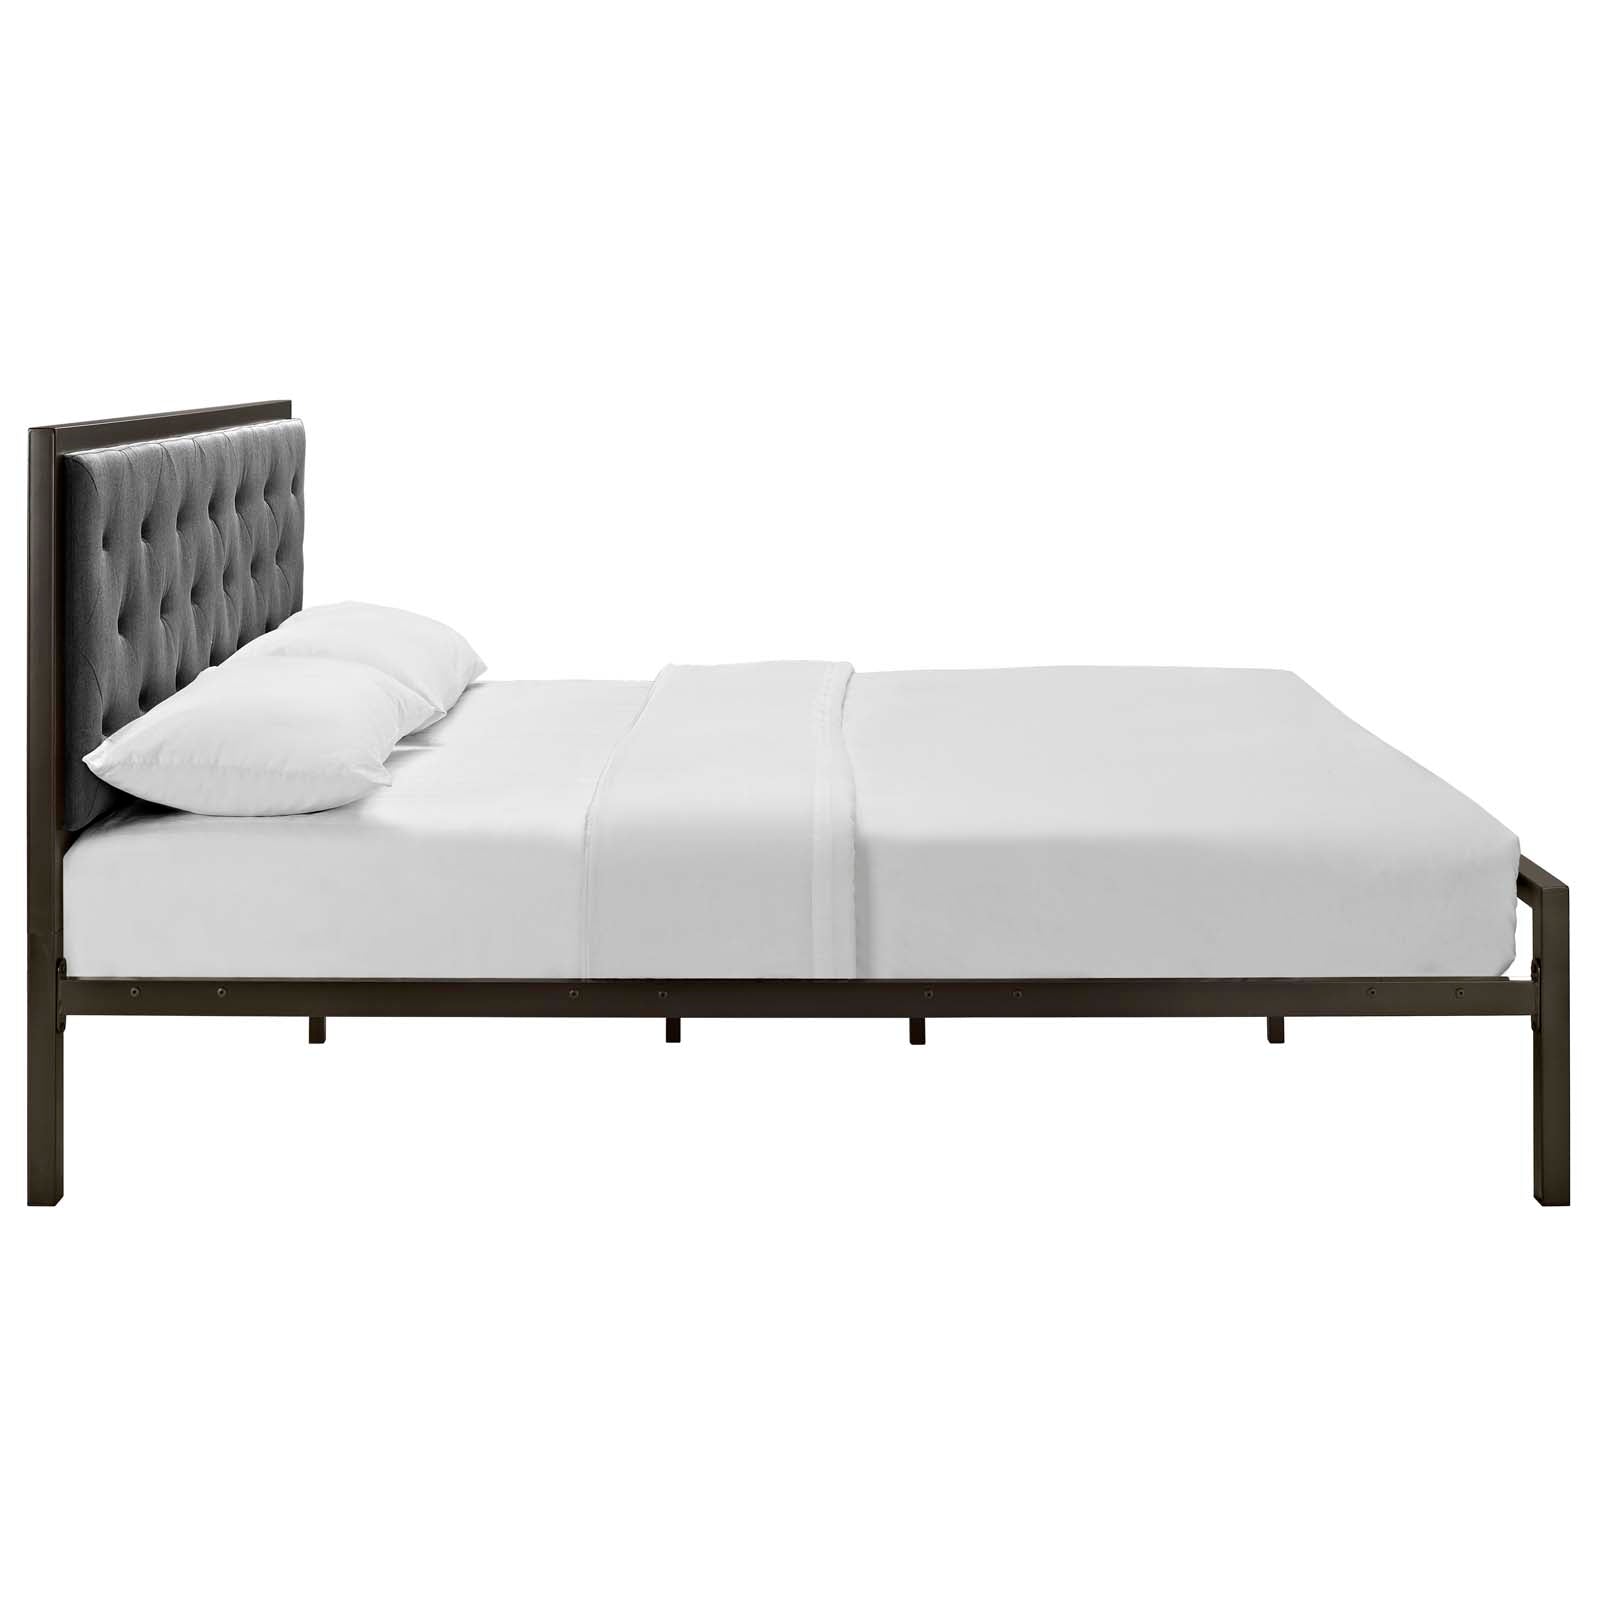 Modway Beds - Mia Queen Bed Brown Gray